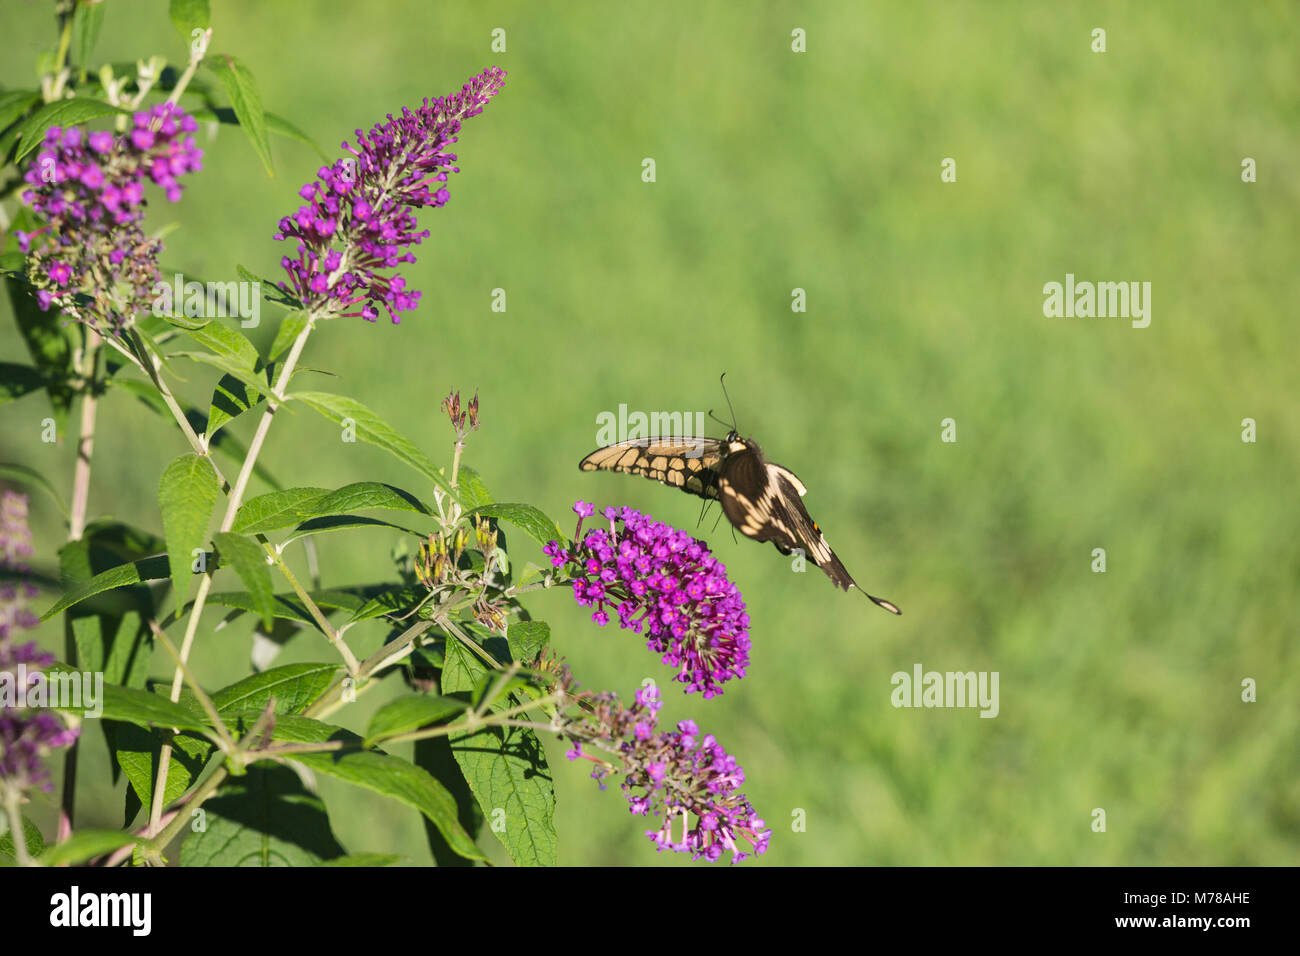 03017-01309 Giant Swallowtail butterfly (Papilio cresphontes) in flight in flower garden, Marion Co., IL Stock Photo